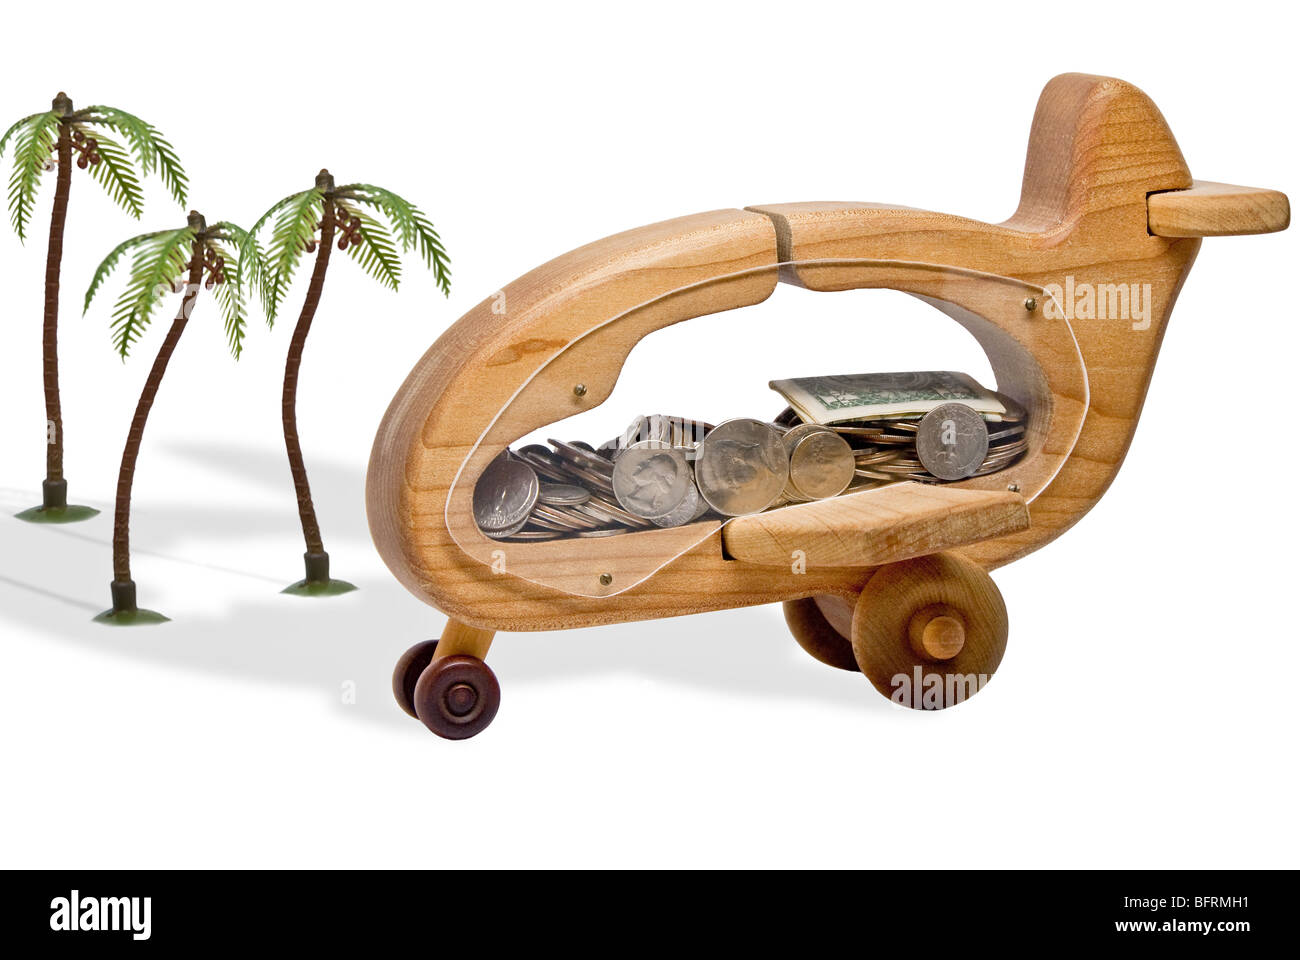 Wooden airplane full of money in tropical location, studio shot Stock Photo